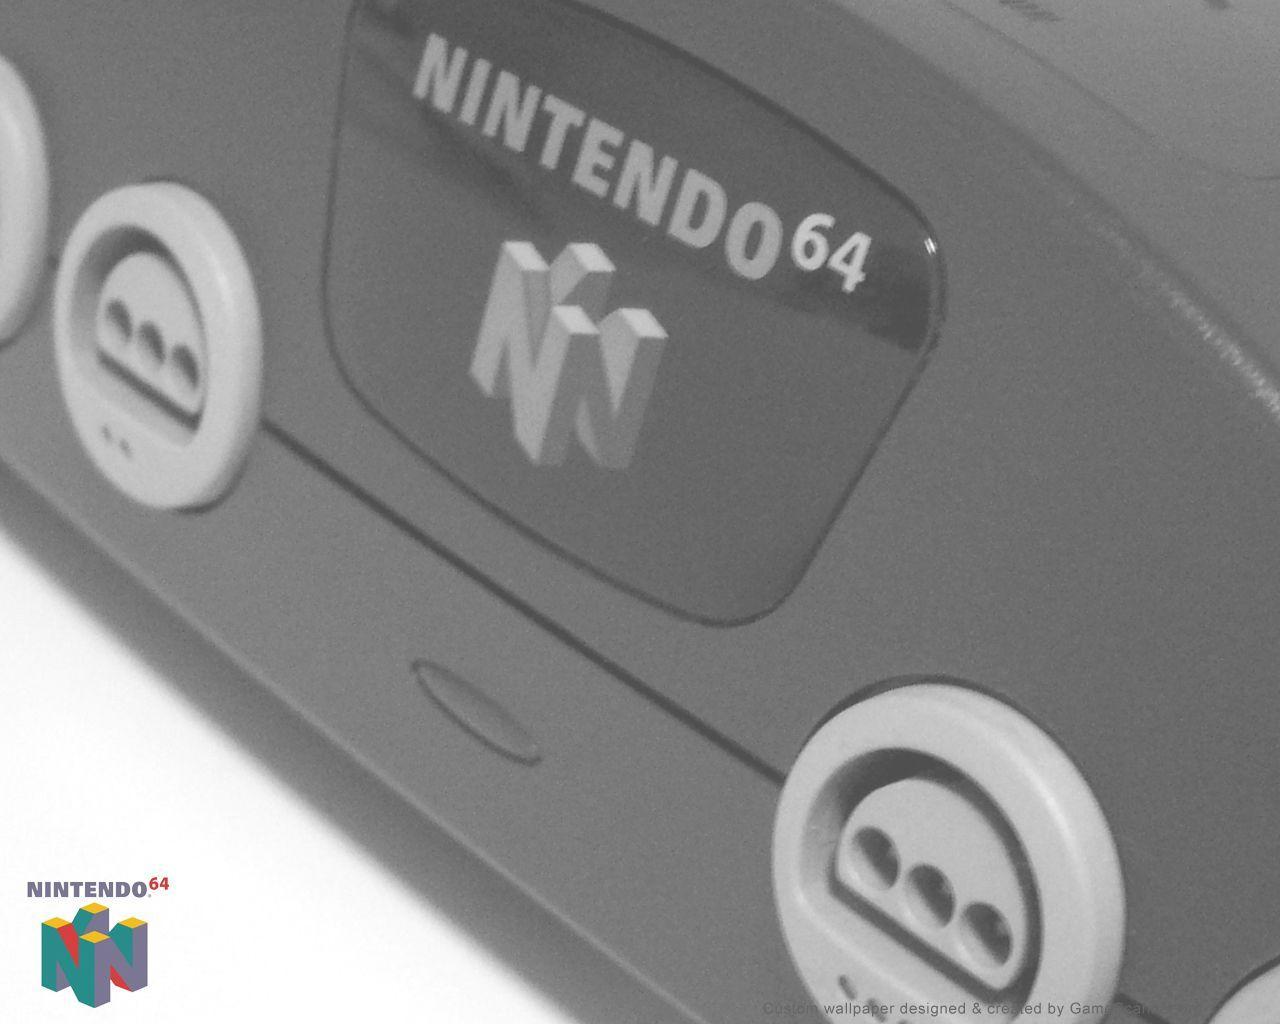 N 64 Image Nintendo 64 HD Wallpaper And Background Photo